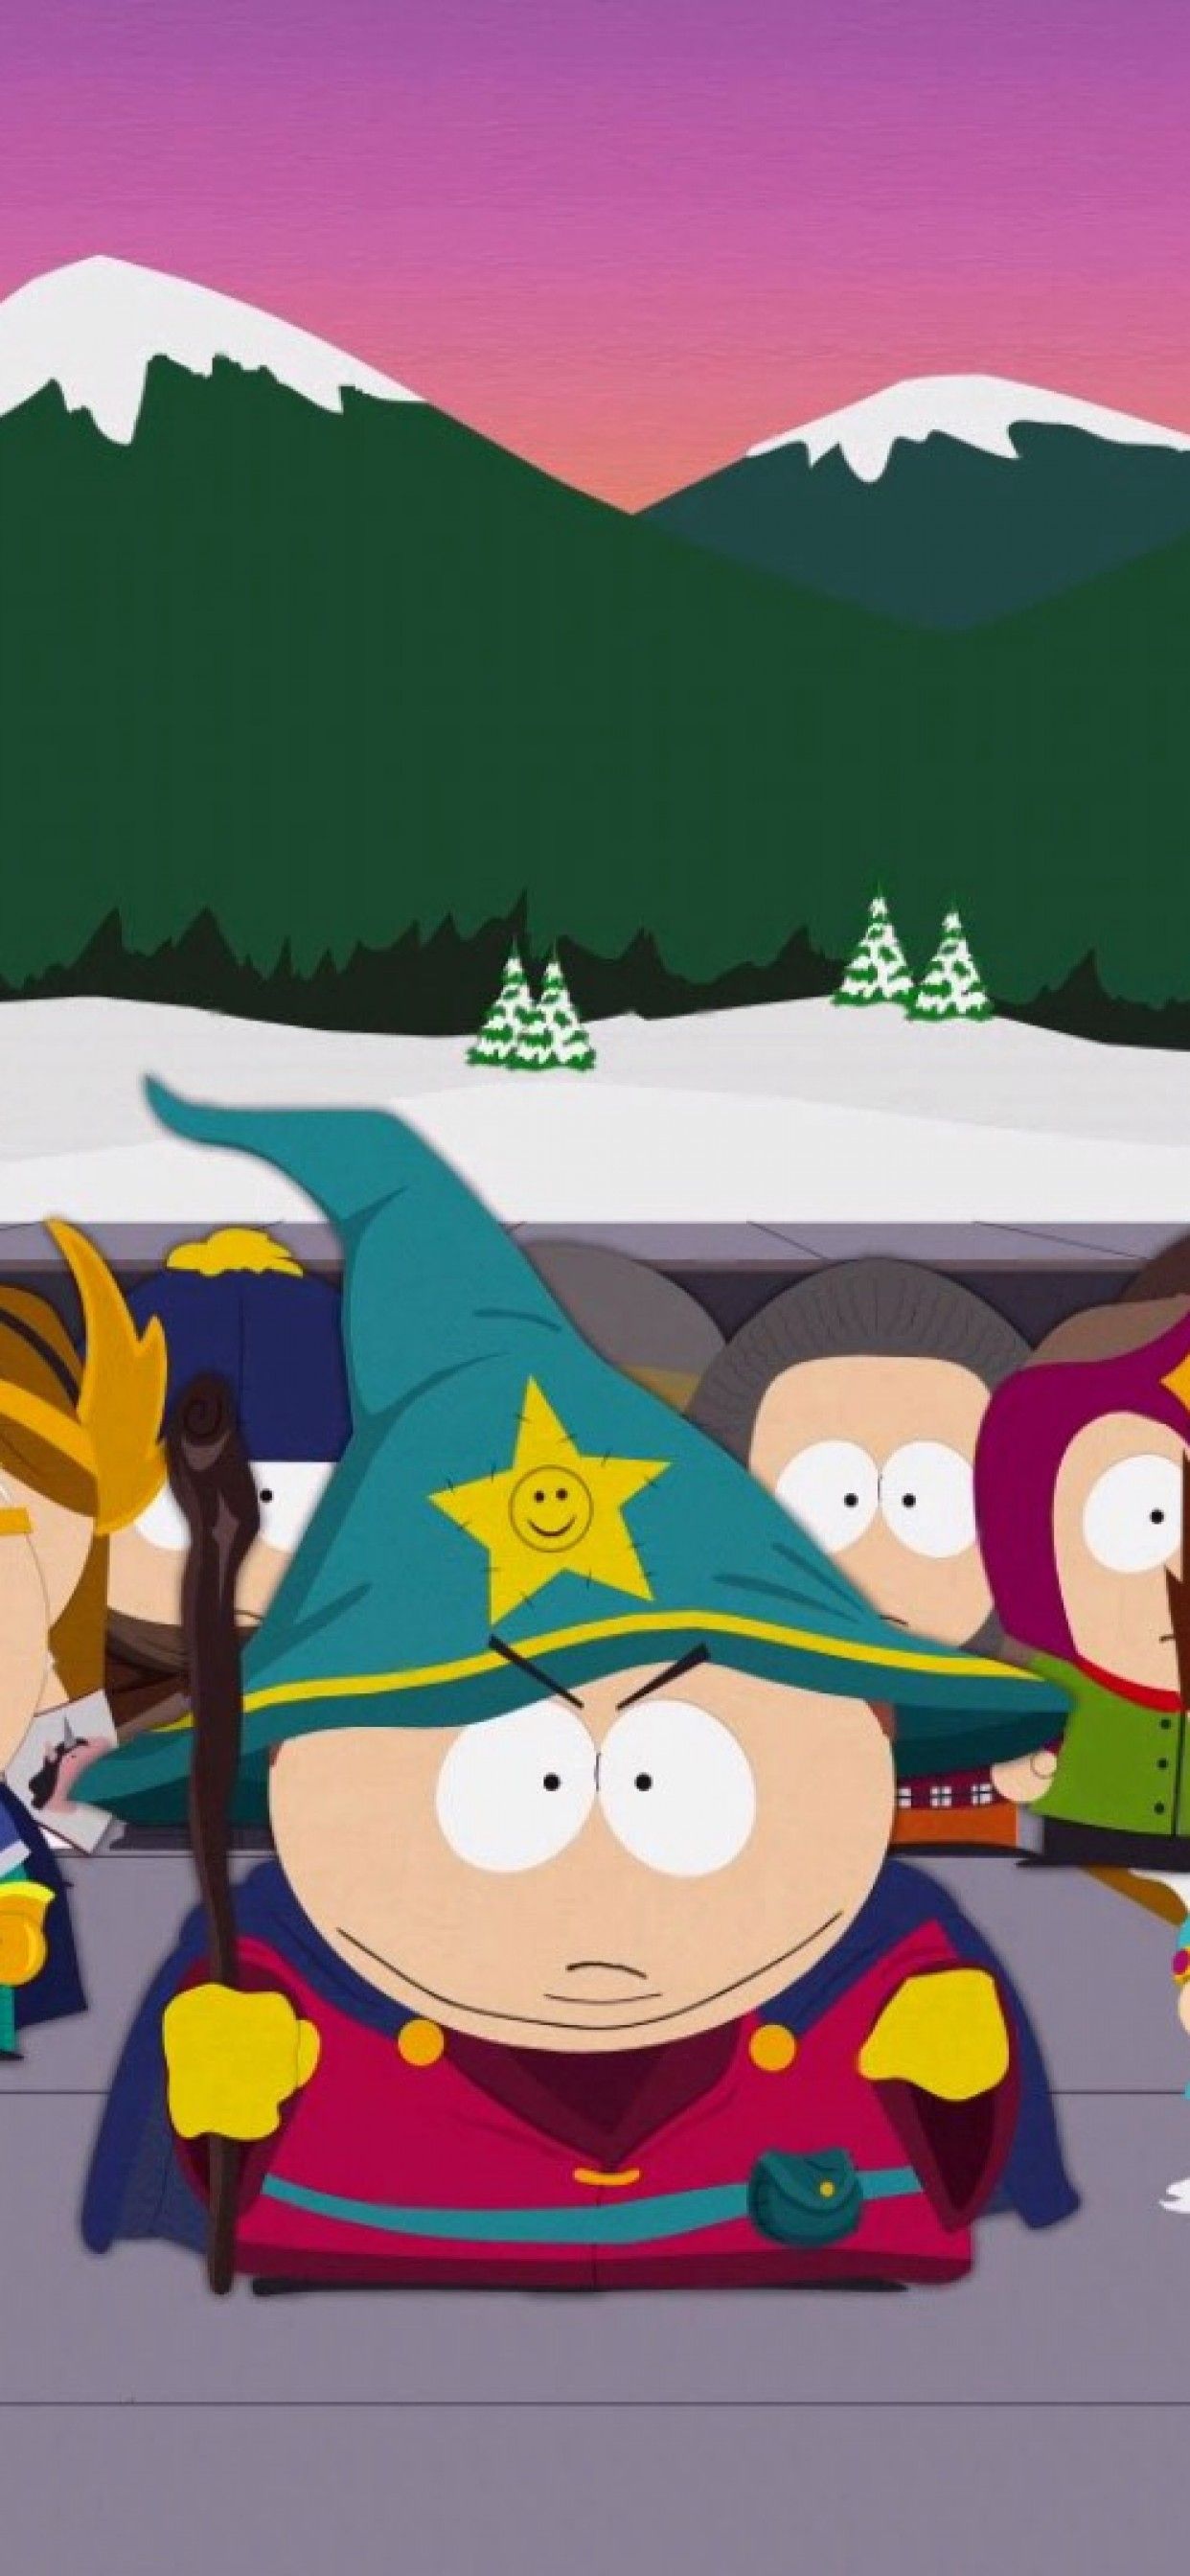 South Park iPhone Wallpapers - Wallpaper Cave